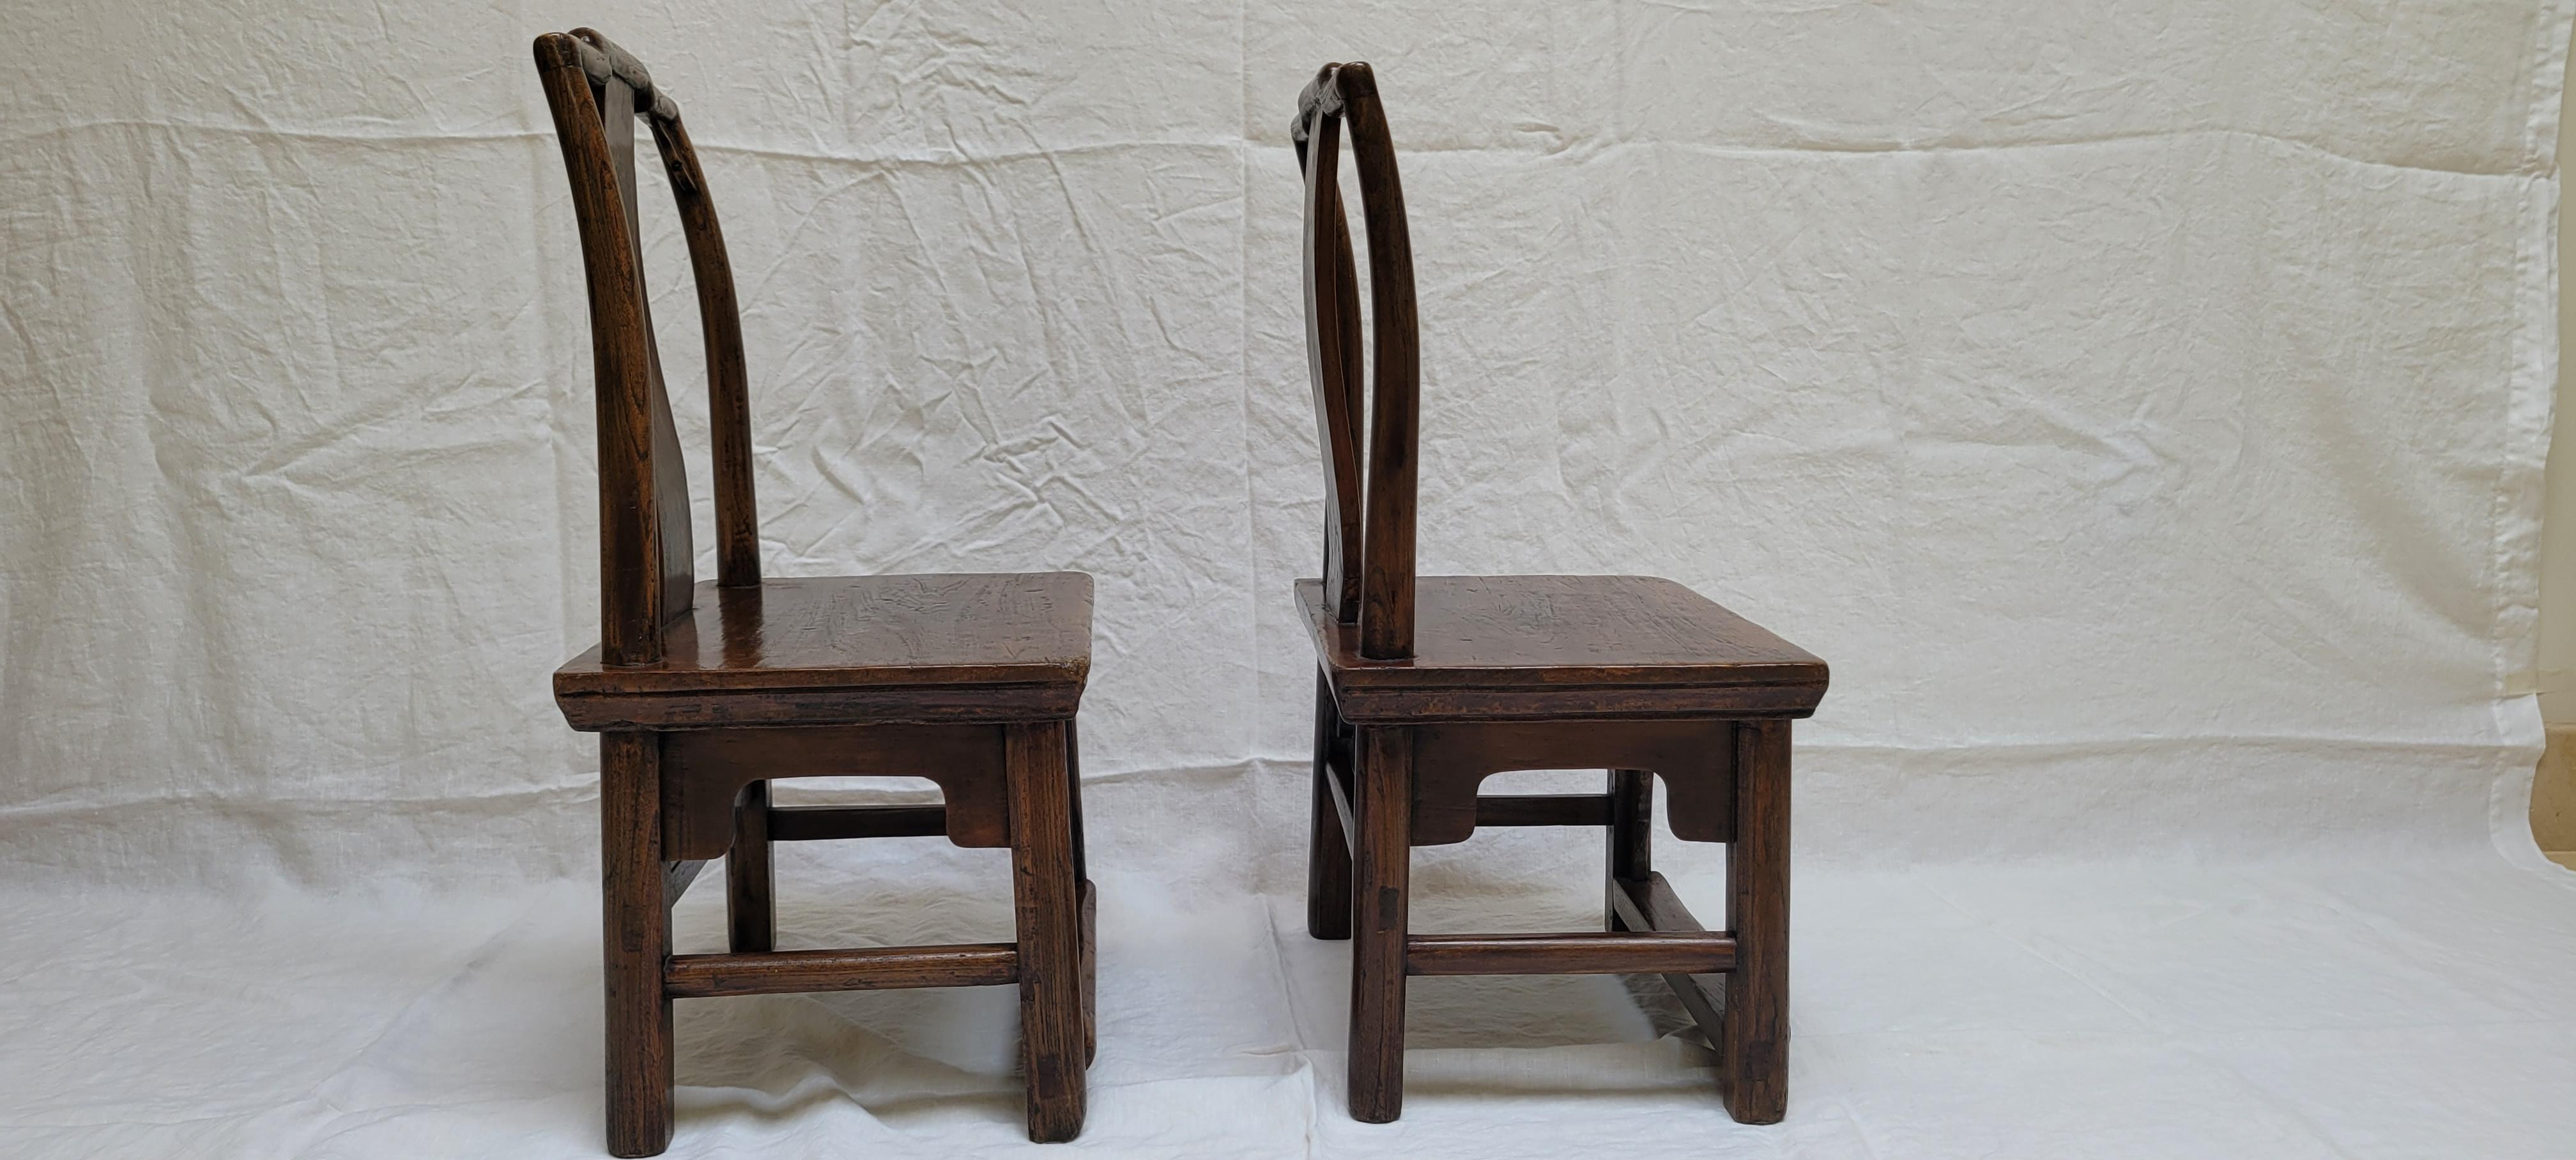 19th Century Pair of Children's Chairs In Good Condition For Sale In Santa Monica, CA